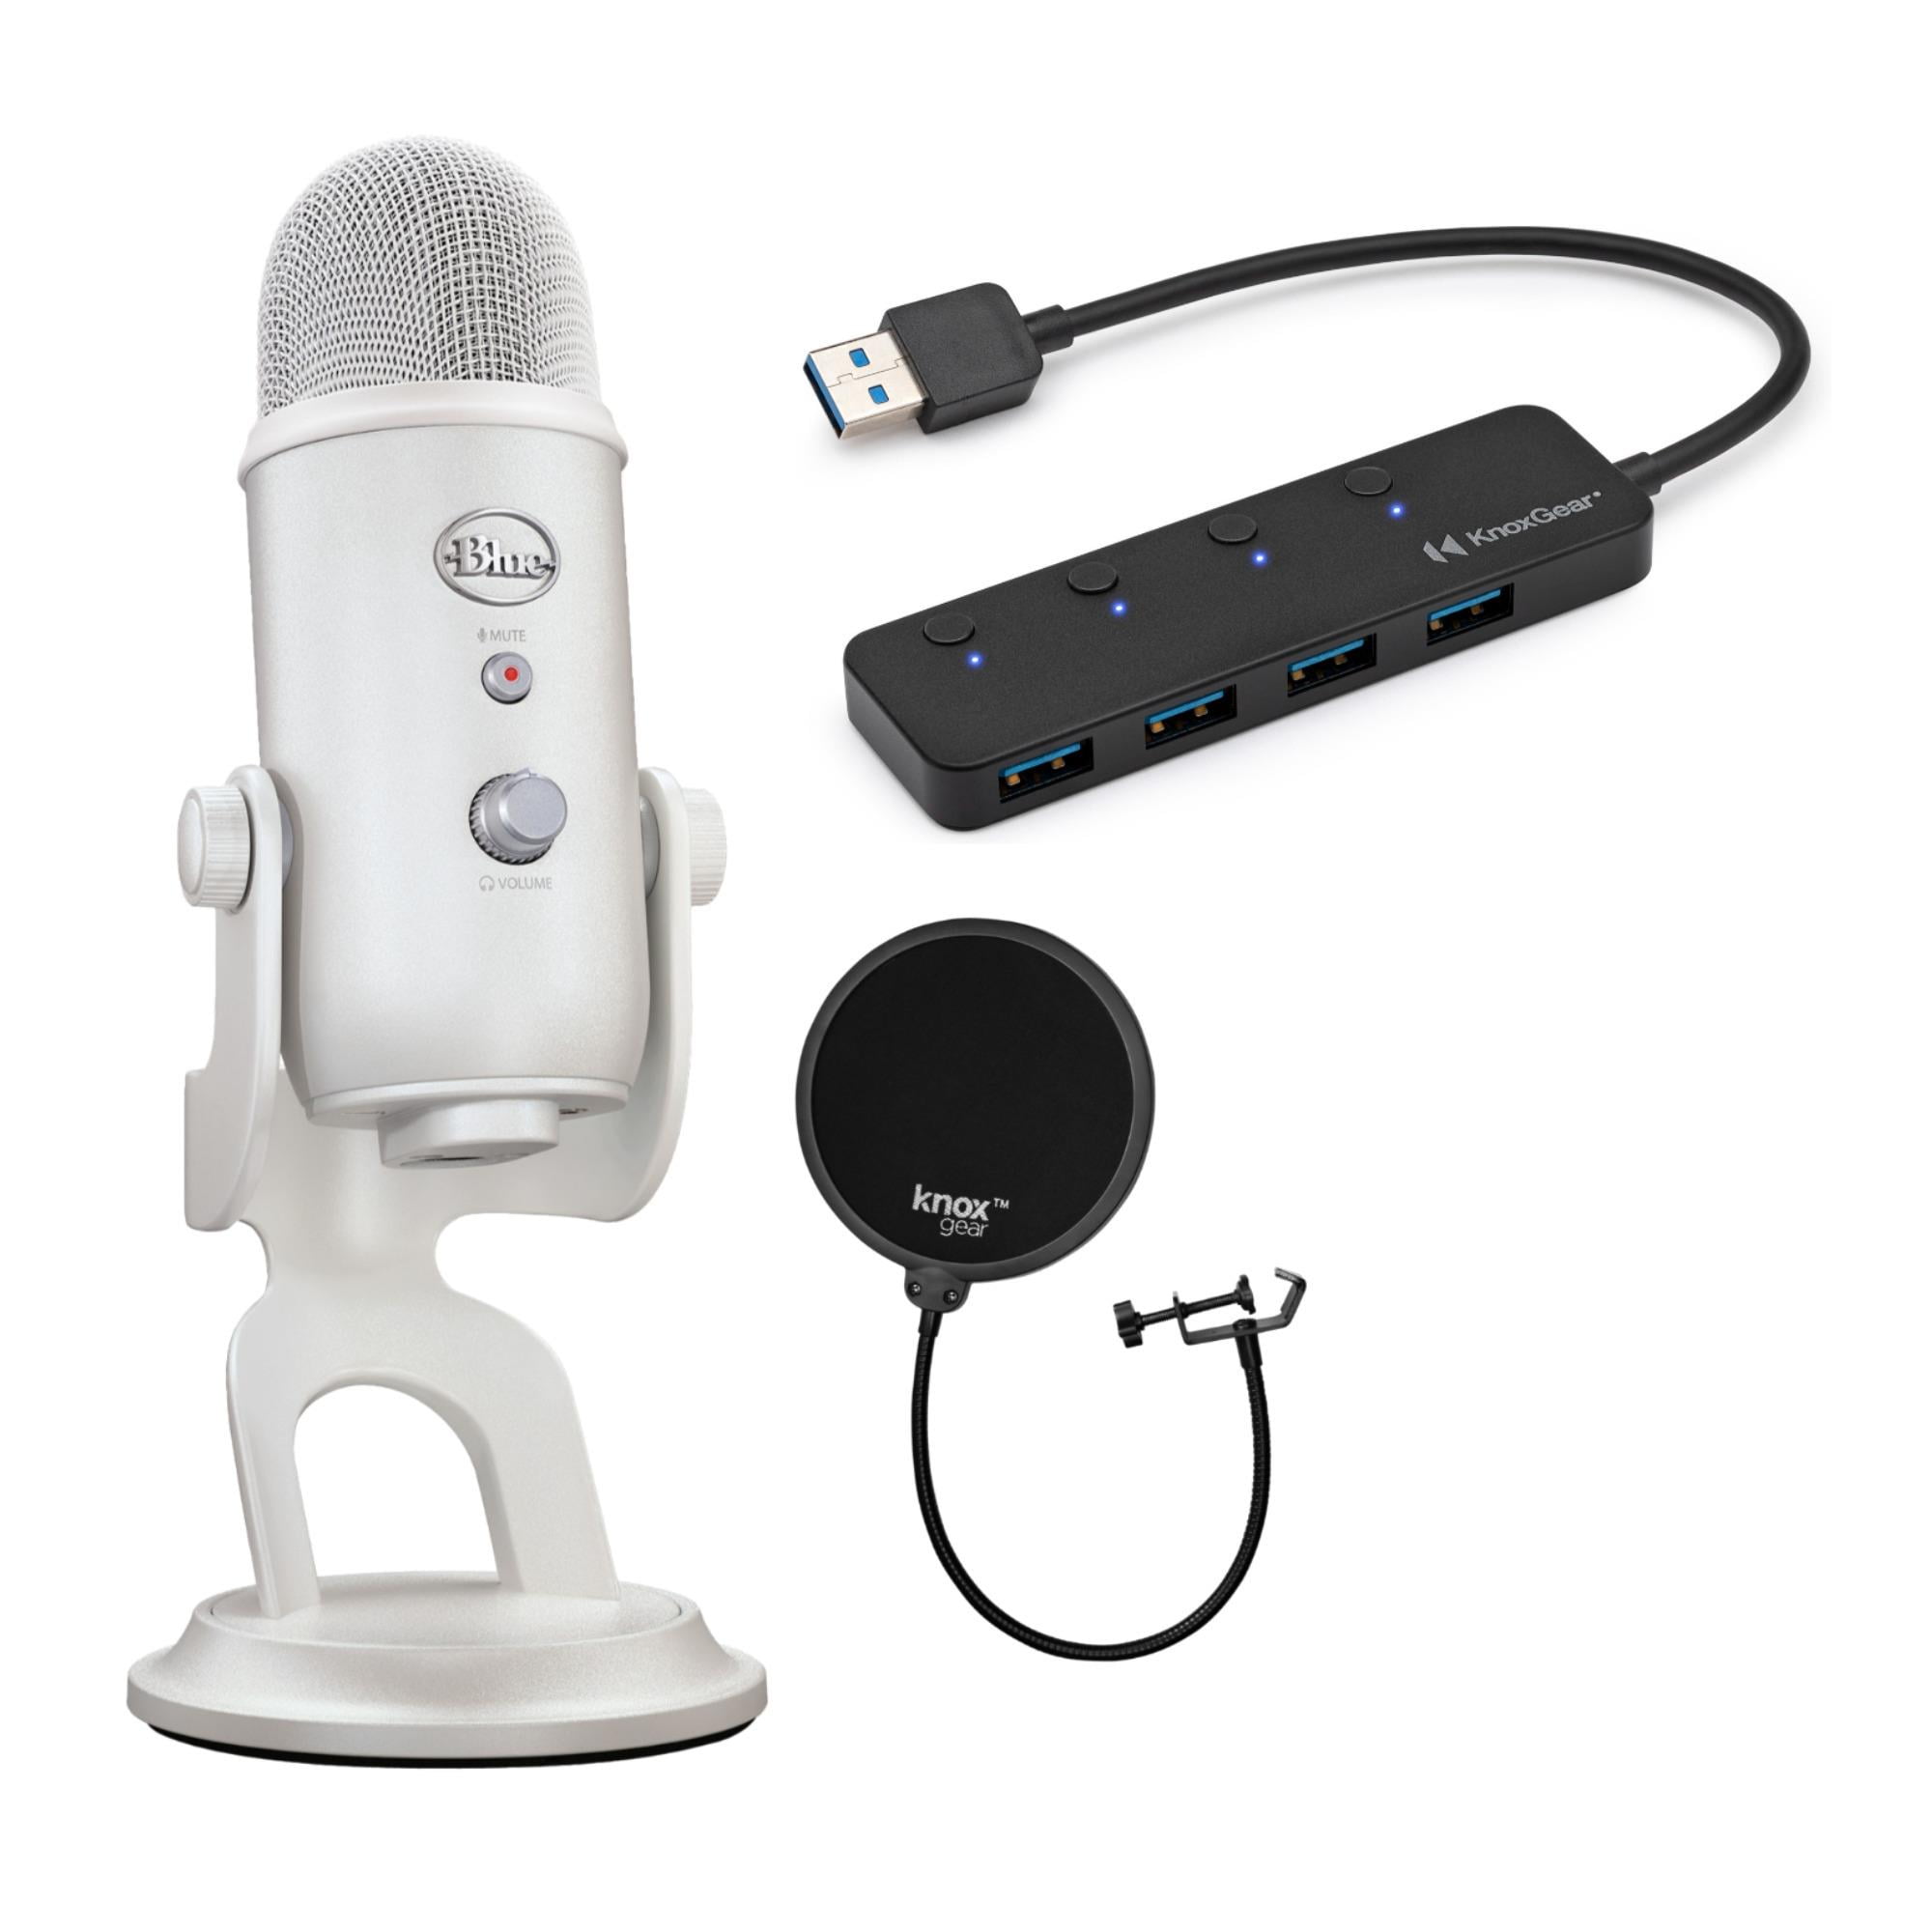  Blue Microphones Yeti USB Microphone (Midnight Blue) Bundle  with 4-Port USB 3.0 Hub and Pop Filter for Broadcasting and Recording  Microphones (2-Pack) (4 Items) : Musical Instruments